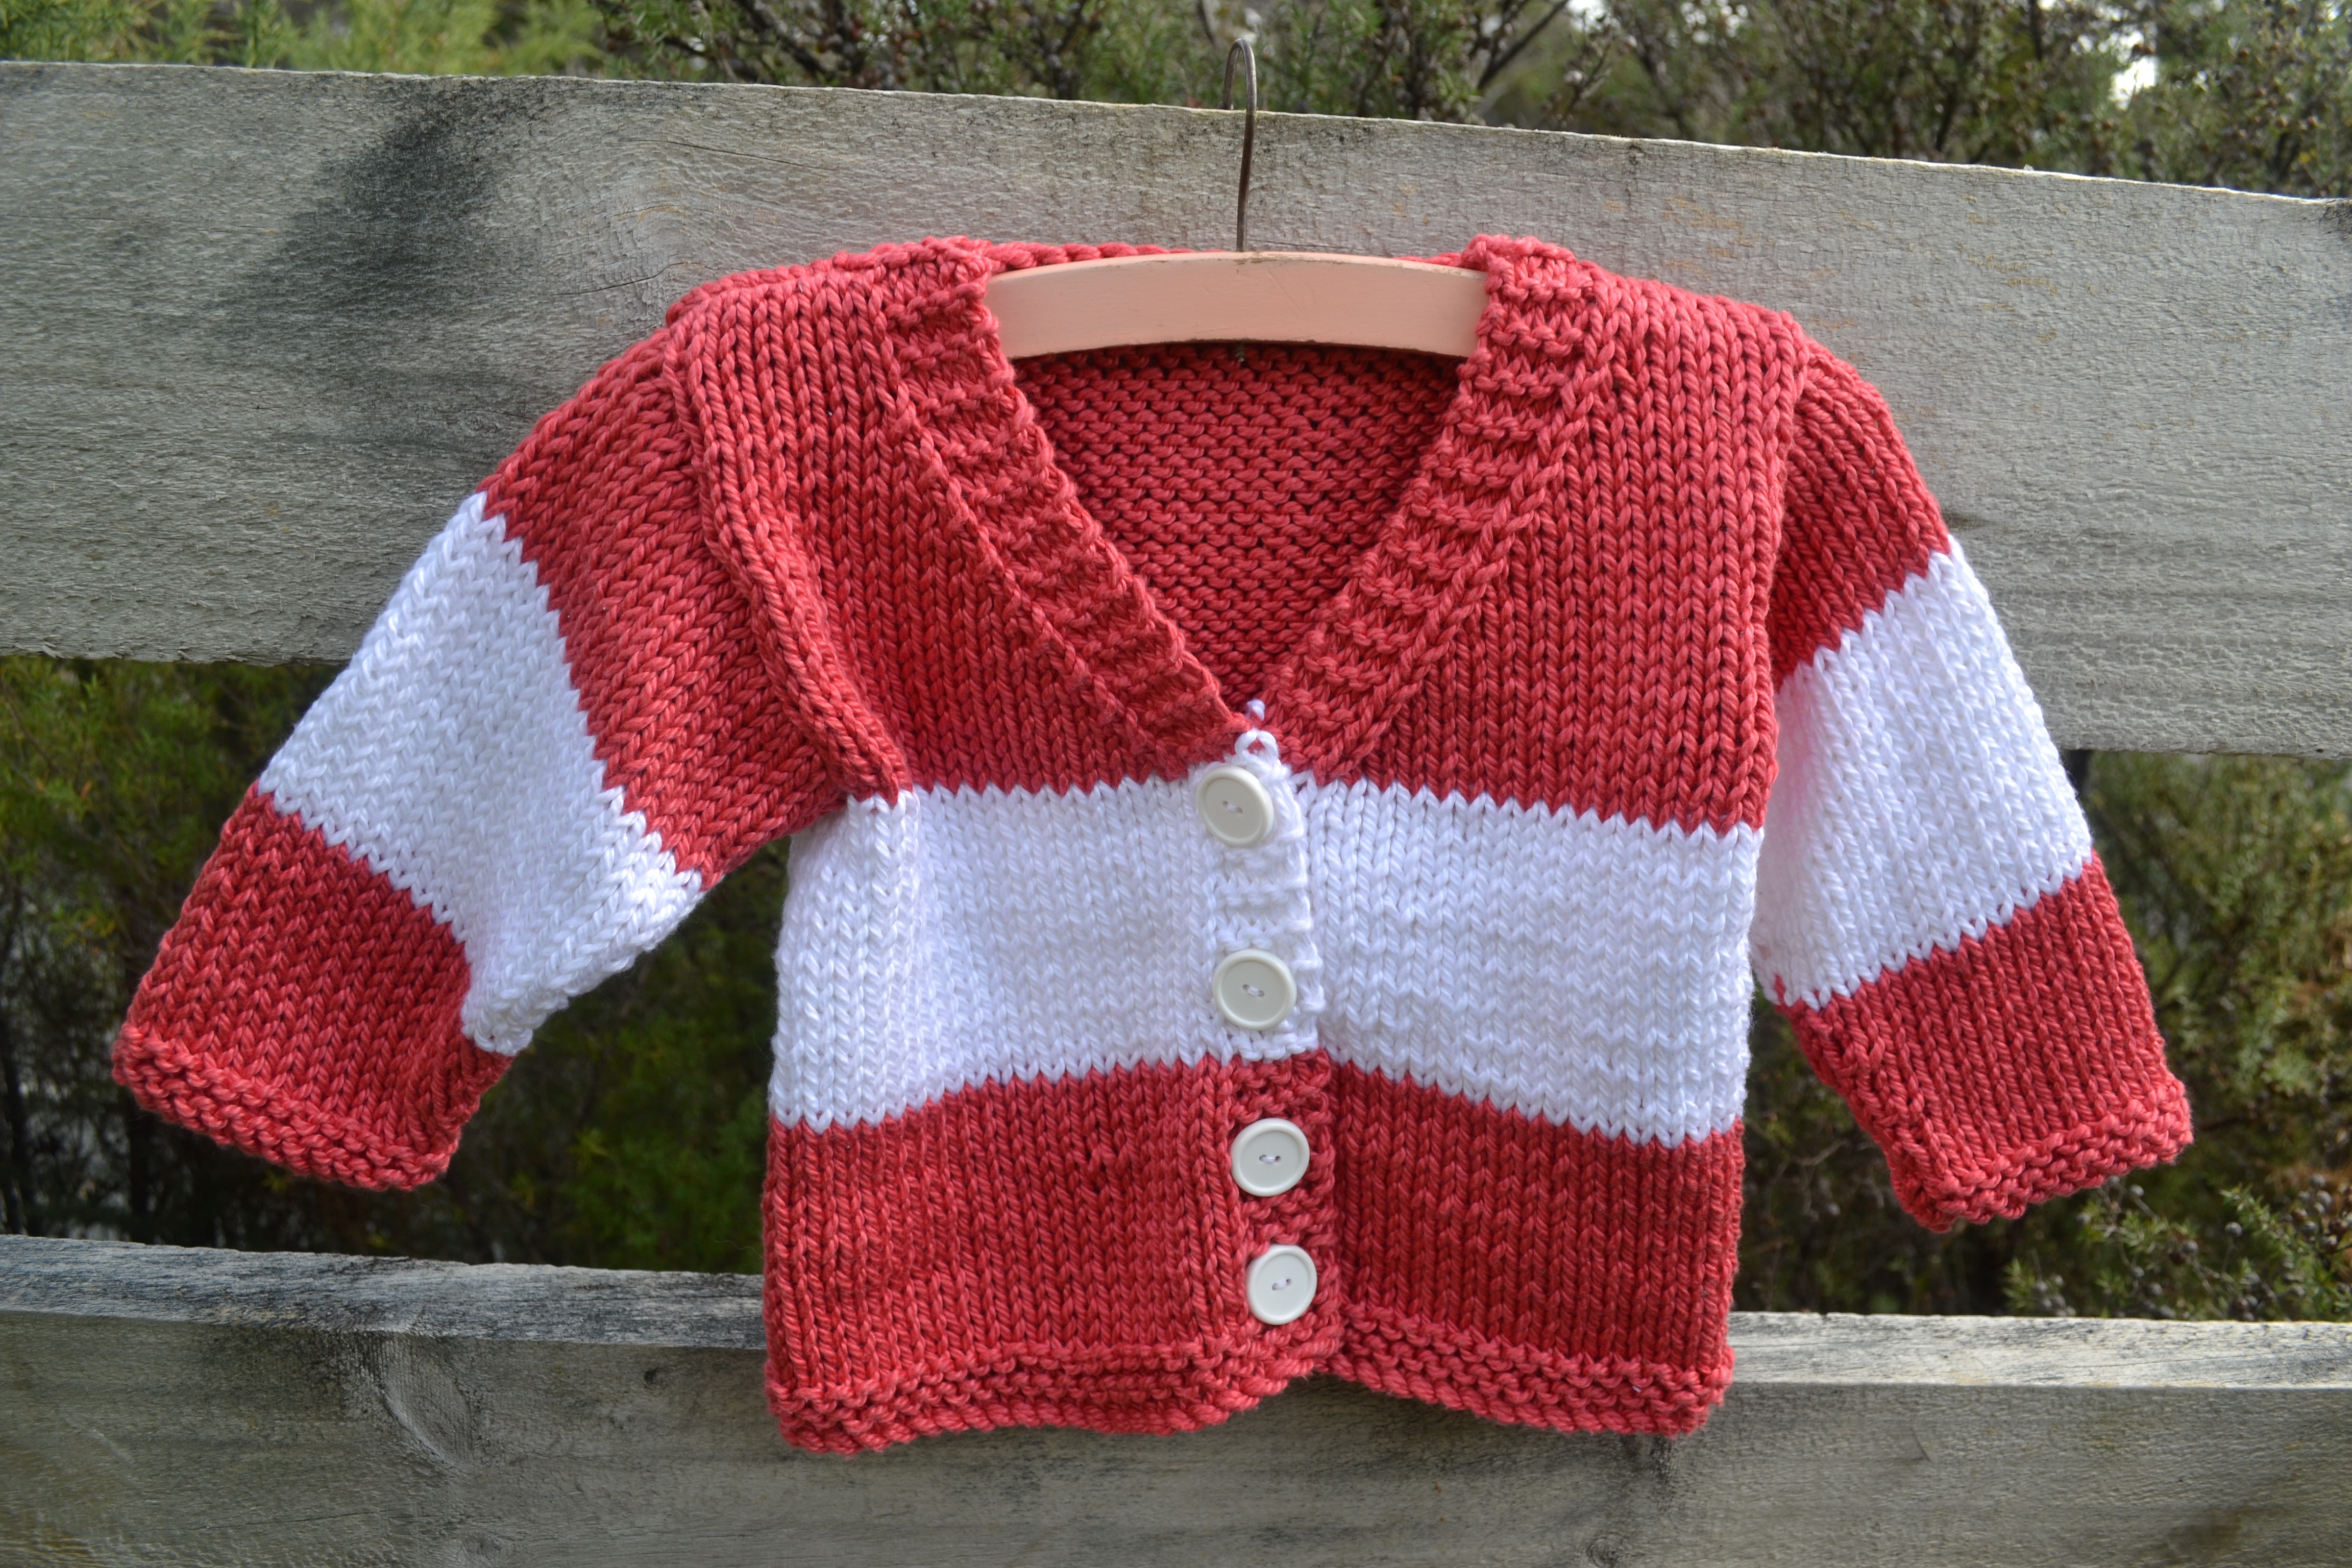 Knitted Jacket Patterns Free A Toddler Cardigan Using Bulky Yarn And A Free Pattern Knanaknits